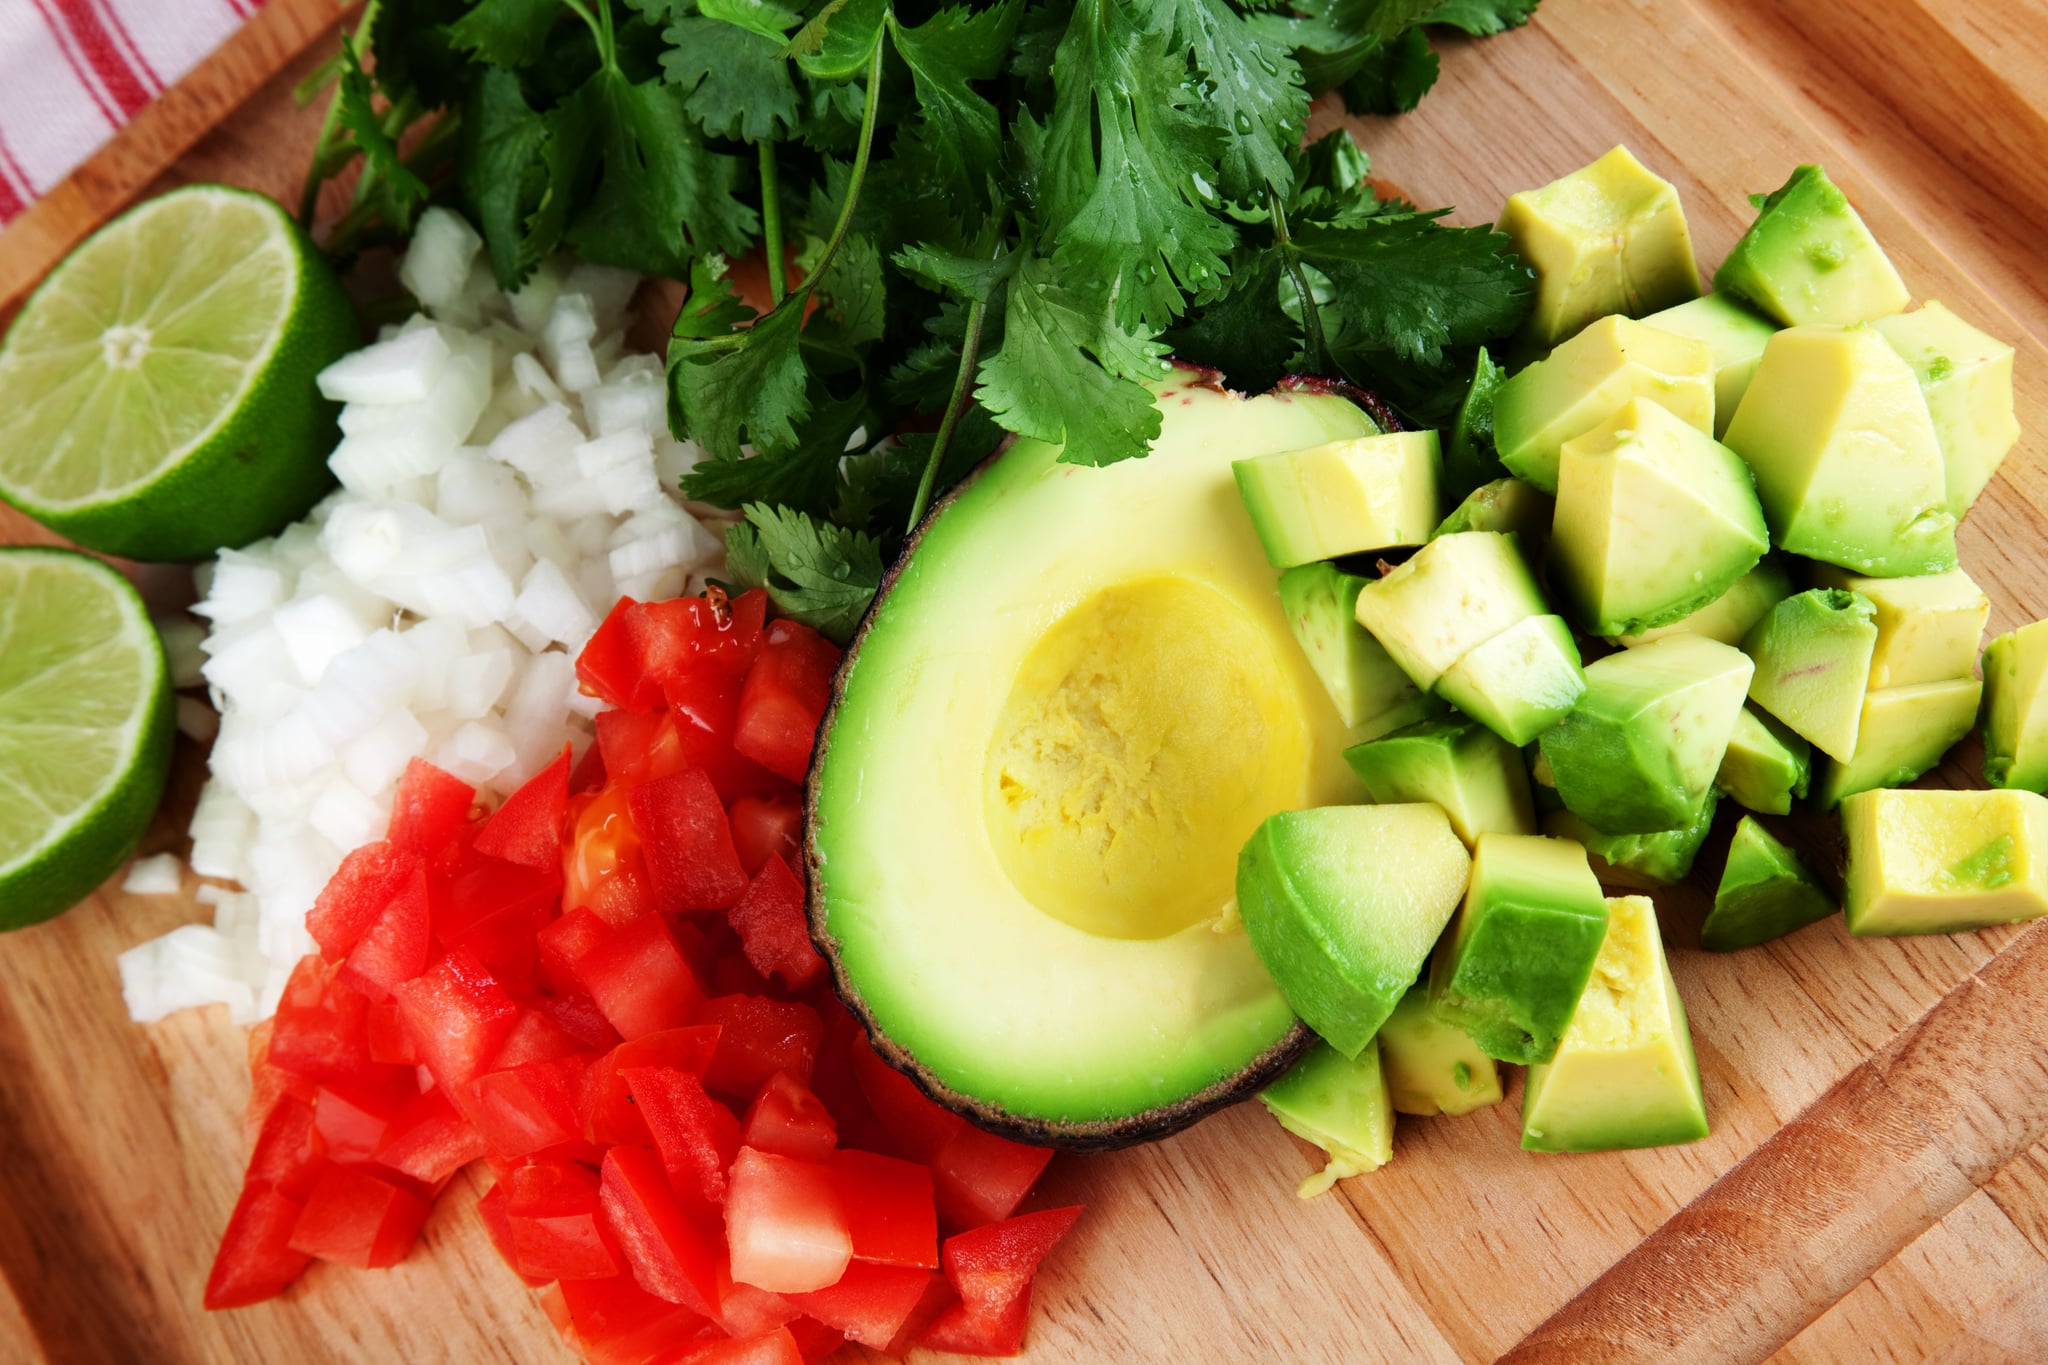 Love Avocado on Everything? Heres How to Ensure Youre Getting Just the Right Amount